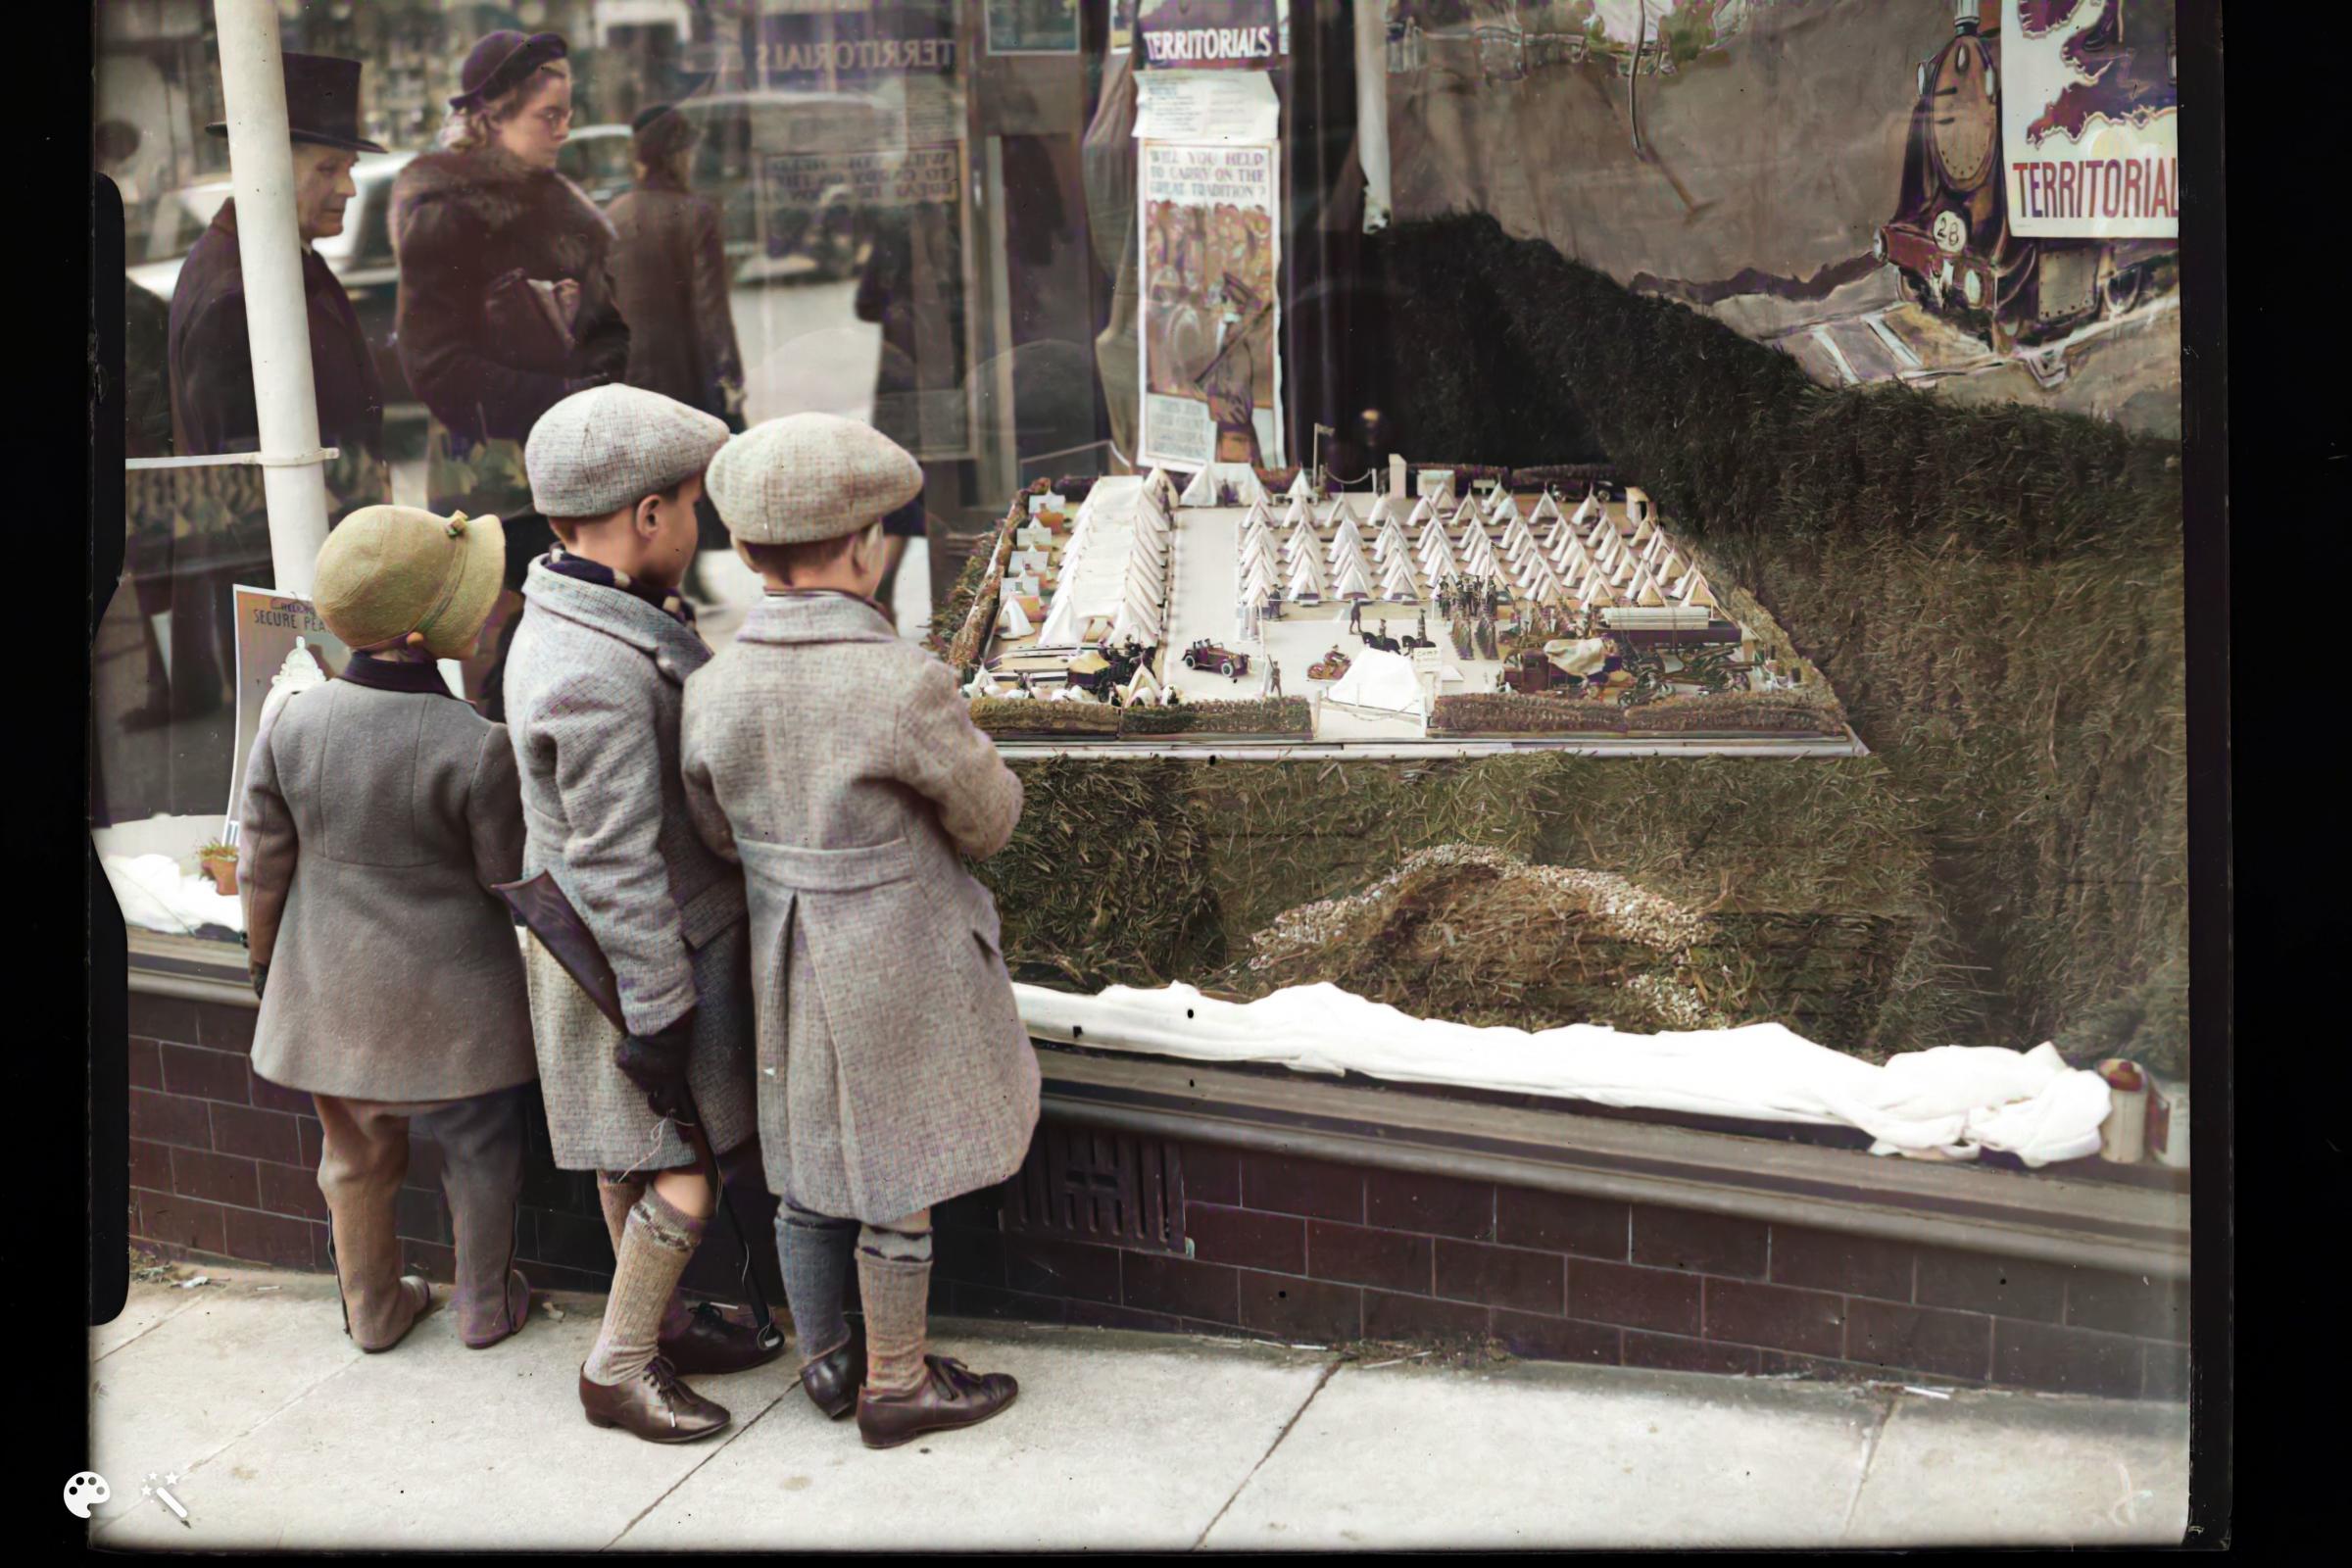 Children studying some sort of military scene in a shop window in the late 1930s. Was this pre-war propaganda?